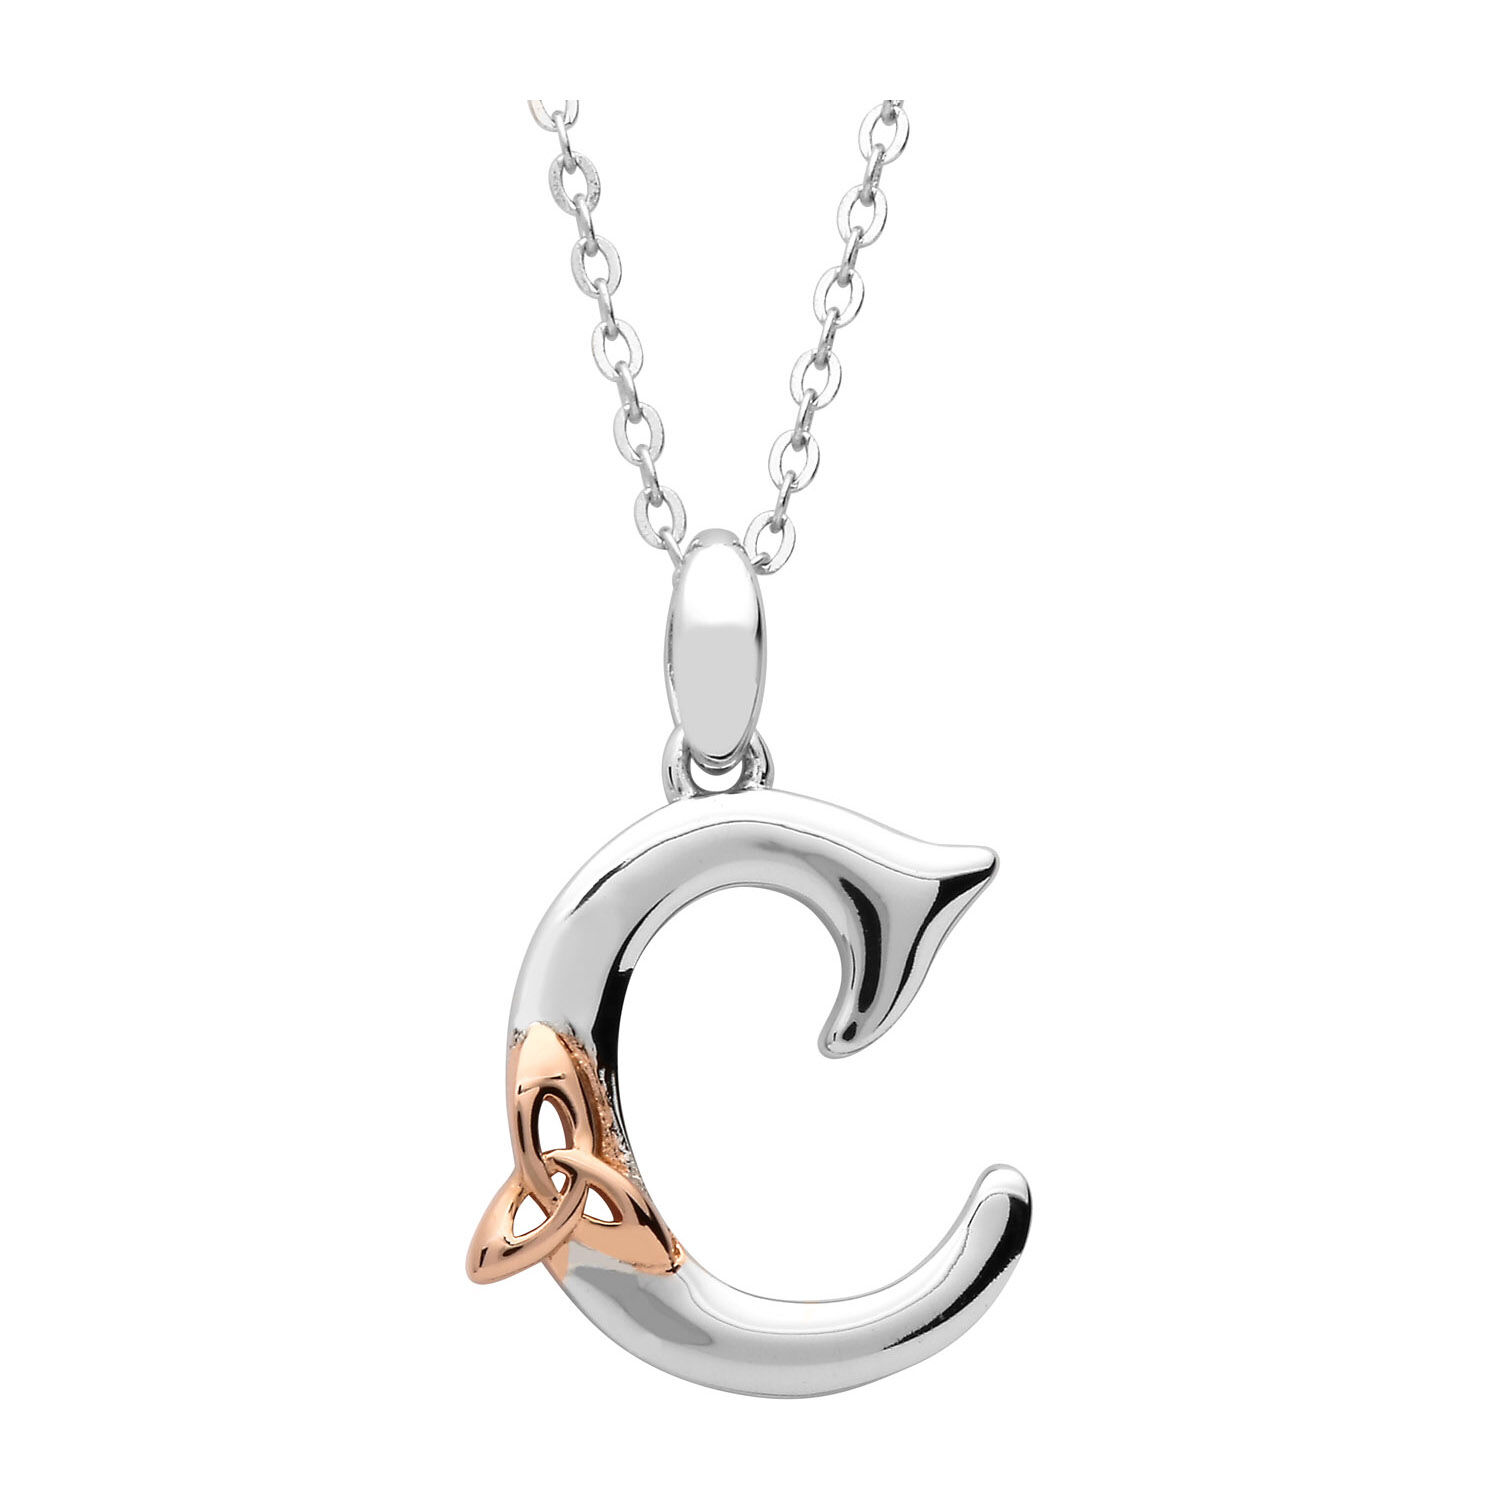 Alphabet C 14K Handcrafted White Gold Pendant Necklace